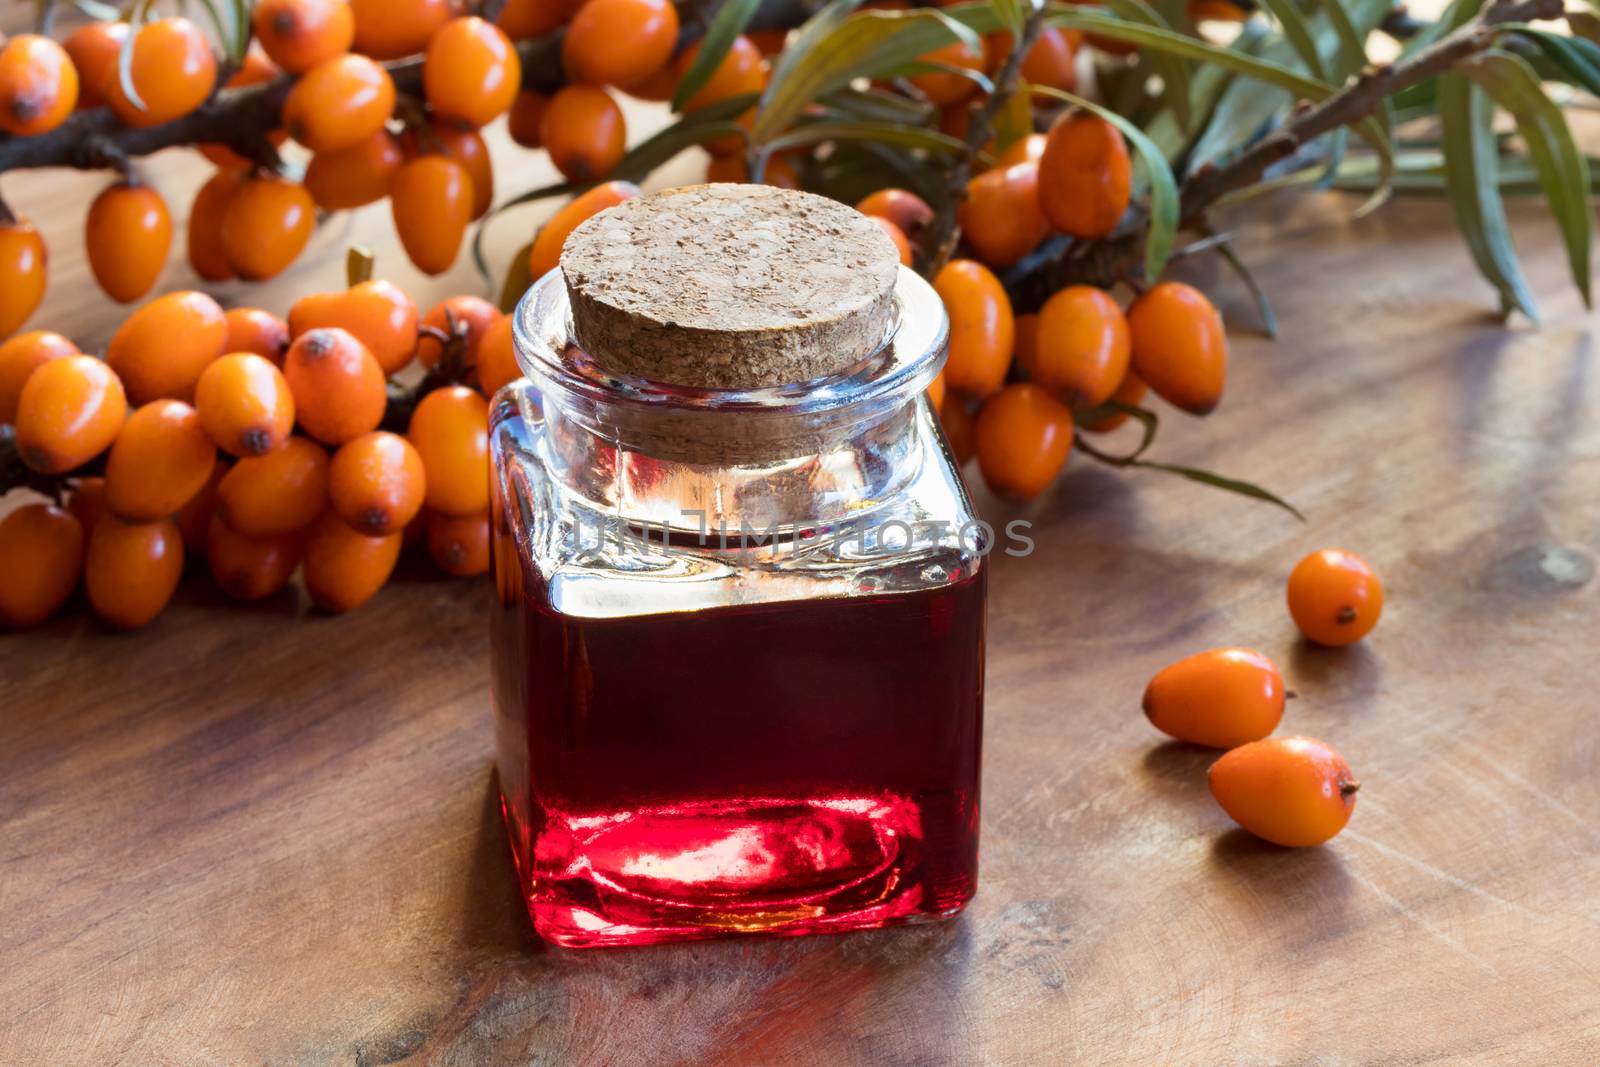 Sea buckthorn oil in a glass jar with sea buckthorn berries and leaves in the background